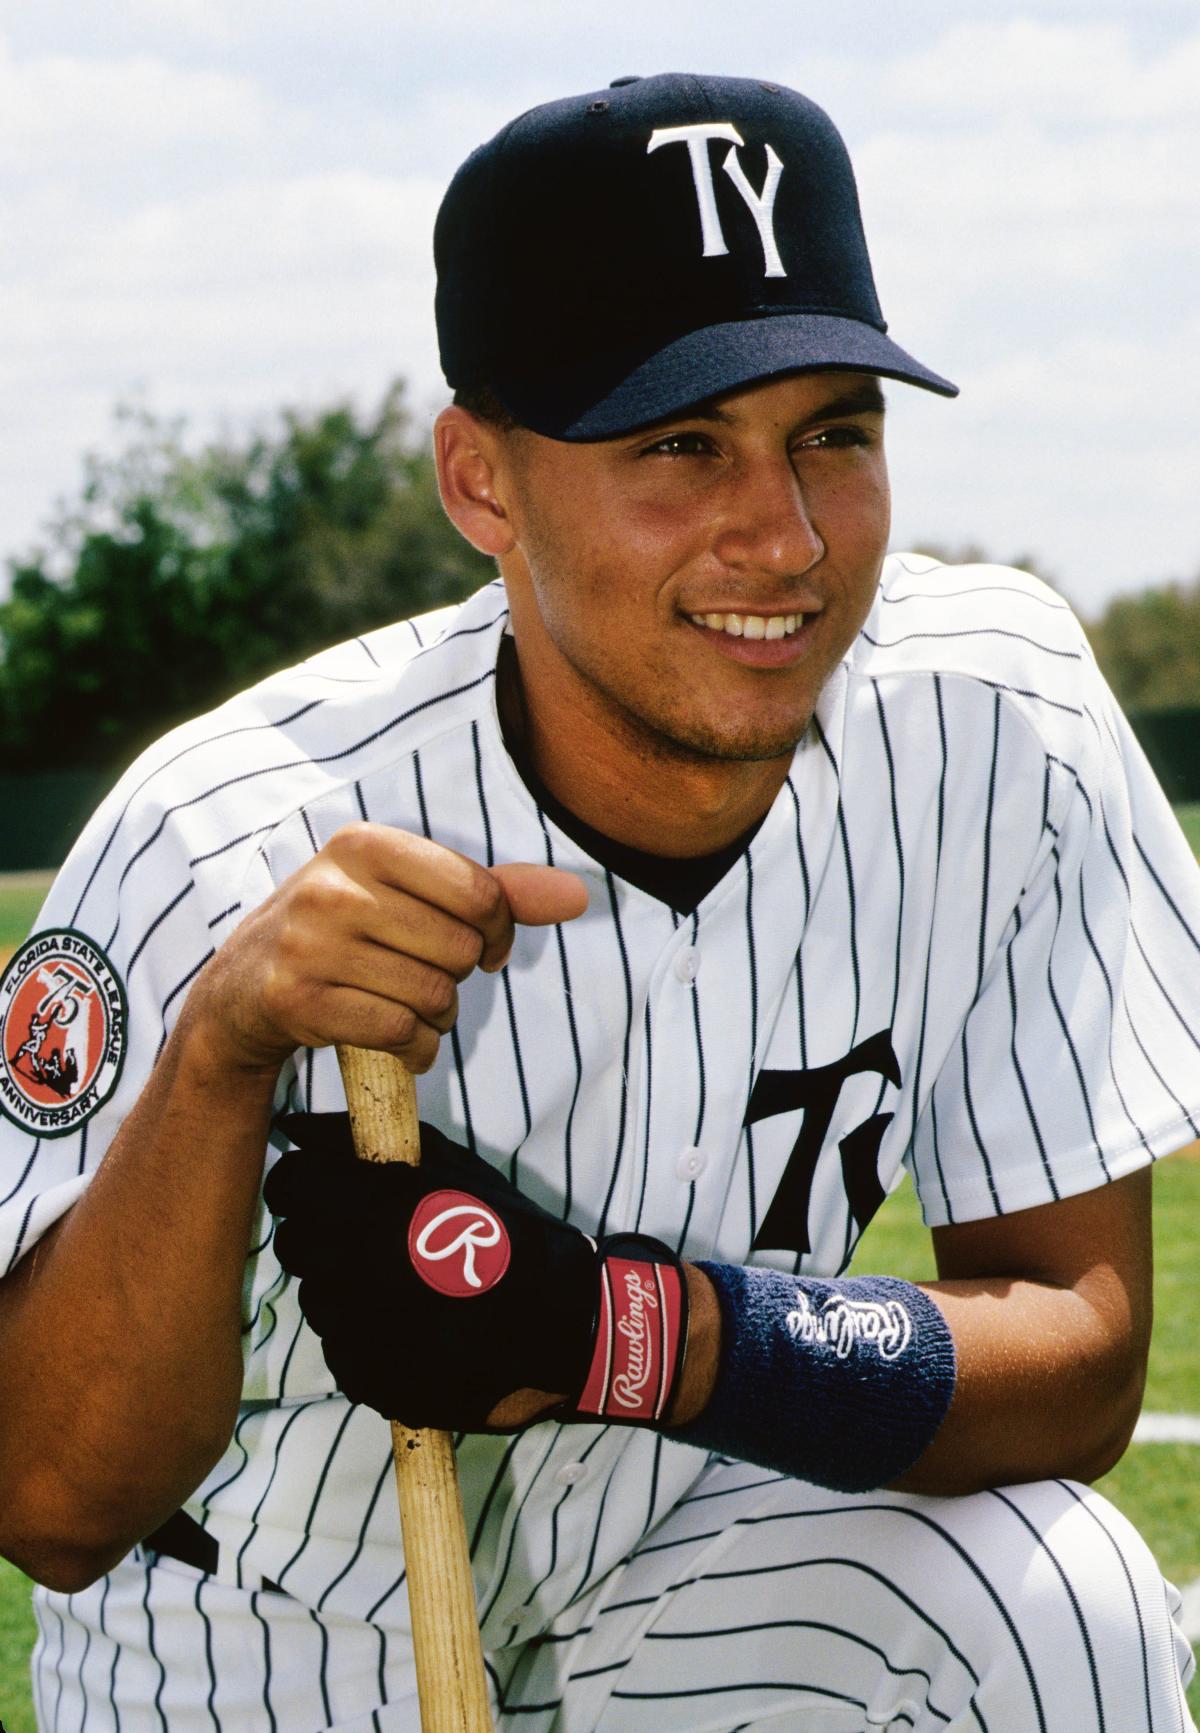 The Captain': Derek Jeter expected to be drafted 1st by Astros or